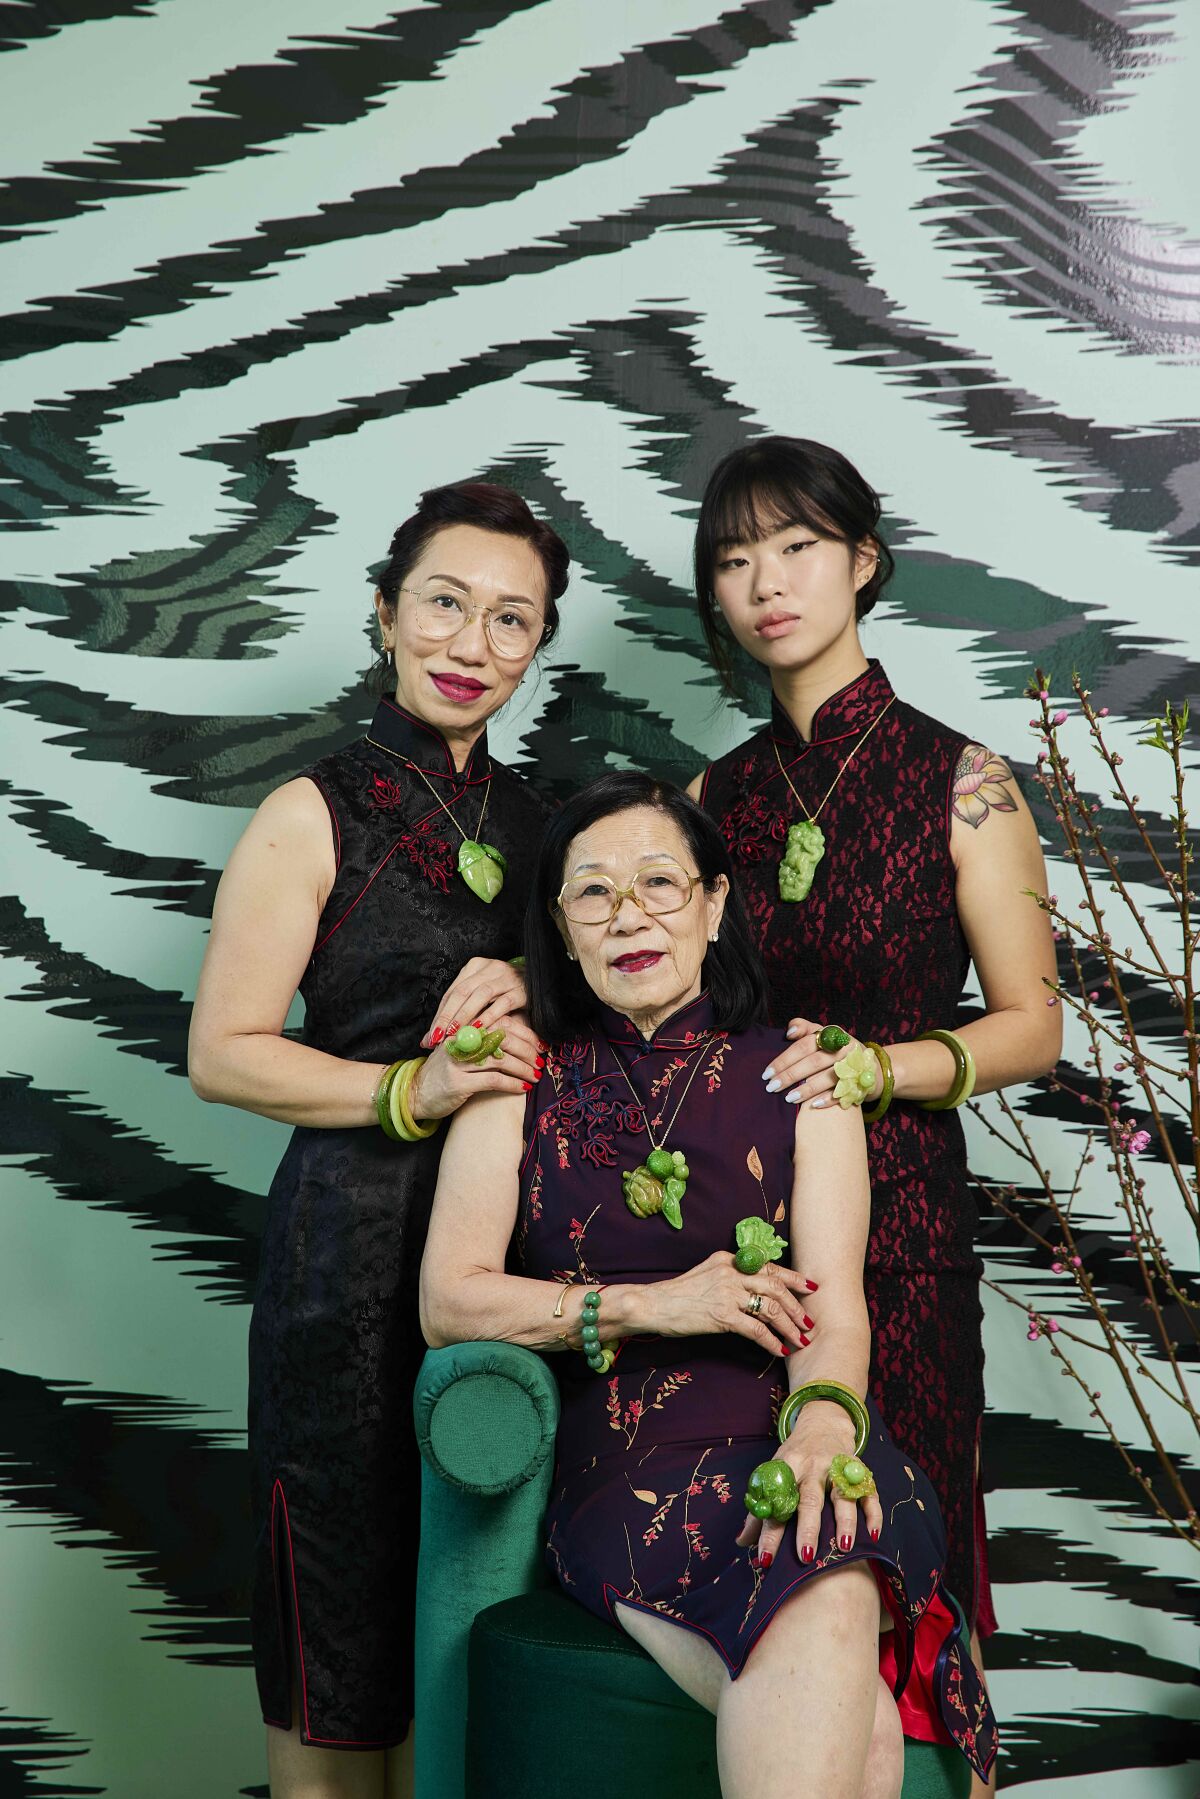 Three women wearing candy jade jewelry pose together in front of a zebra-print background.